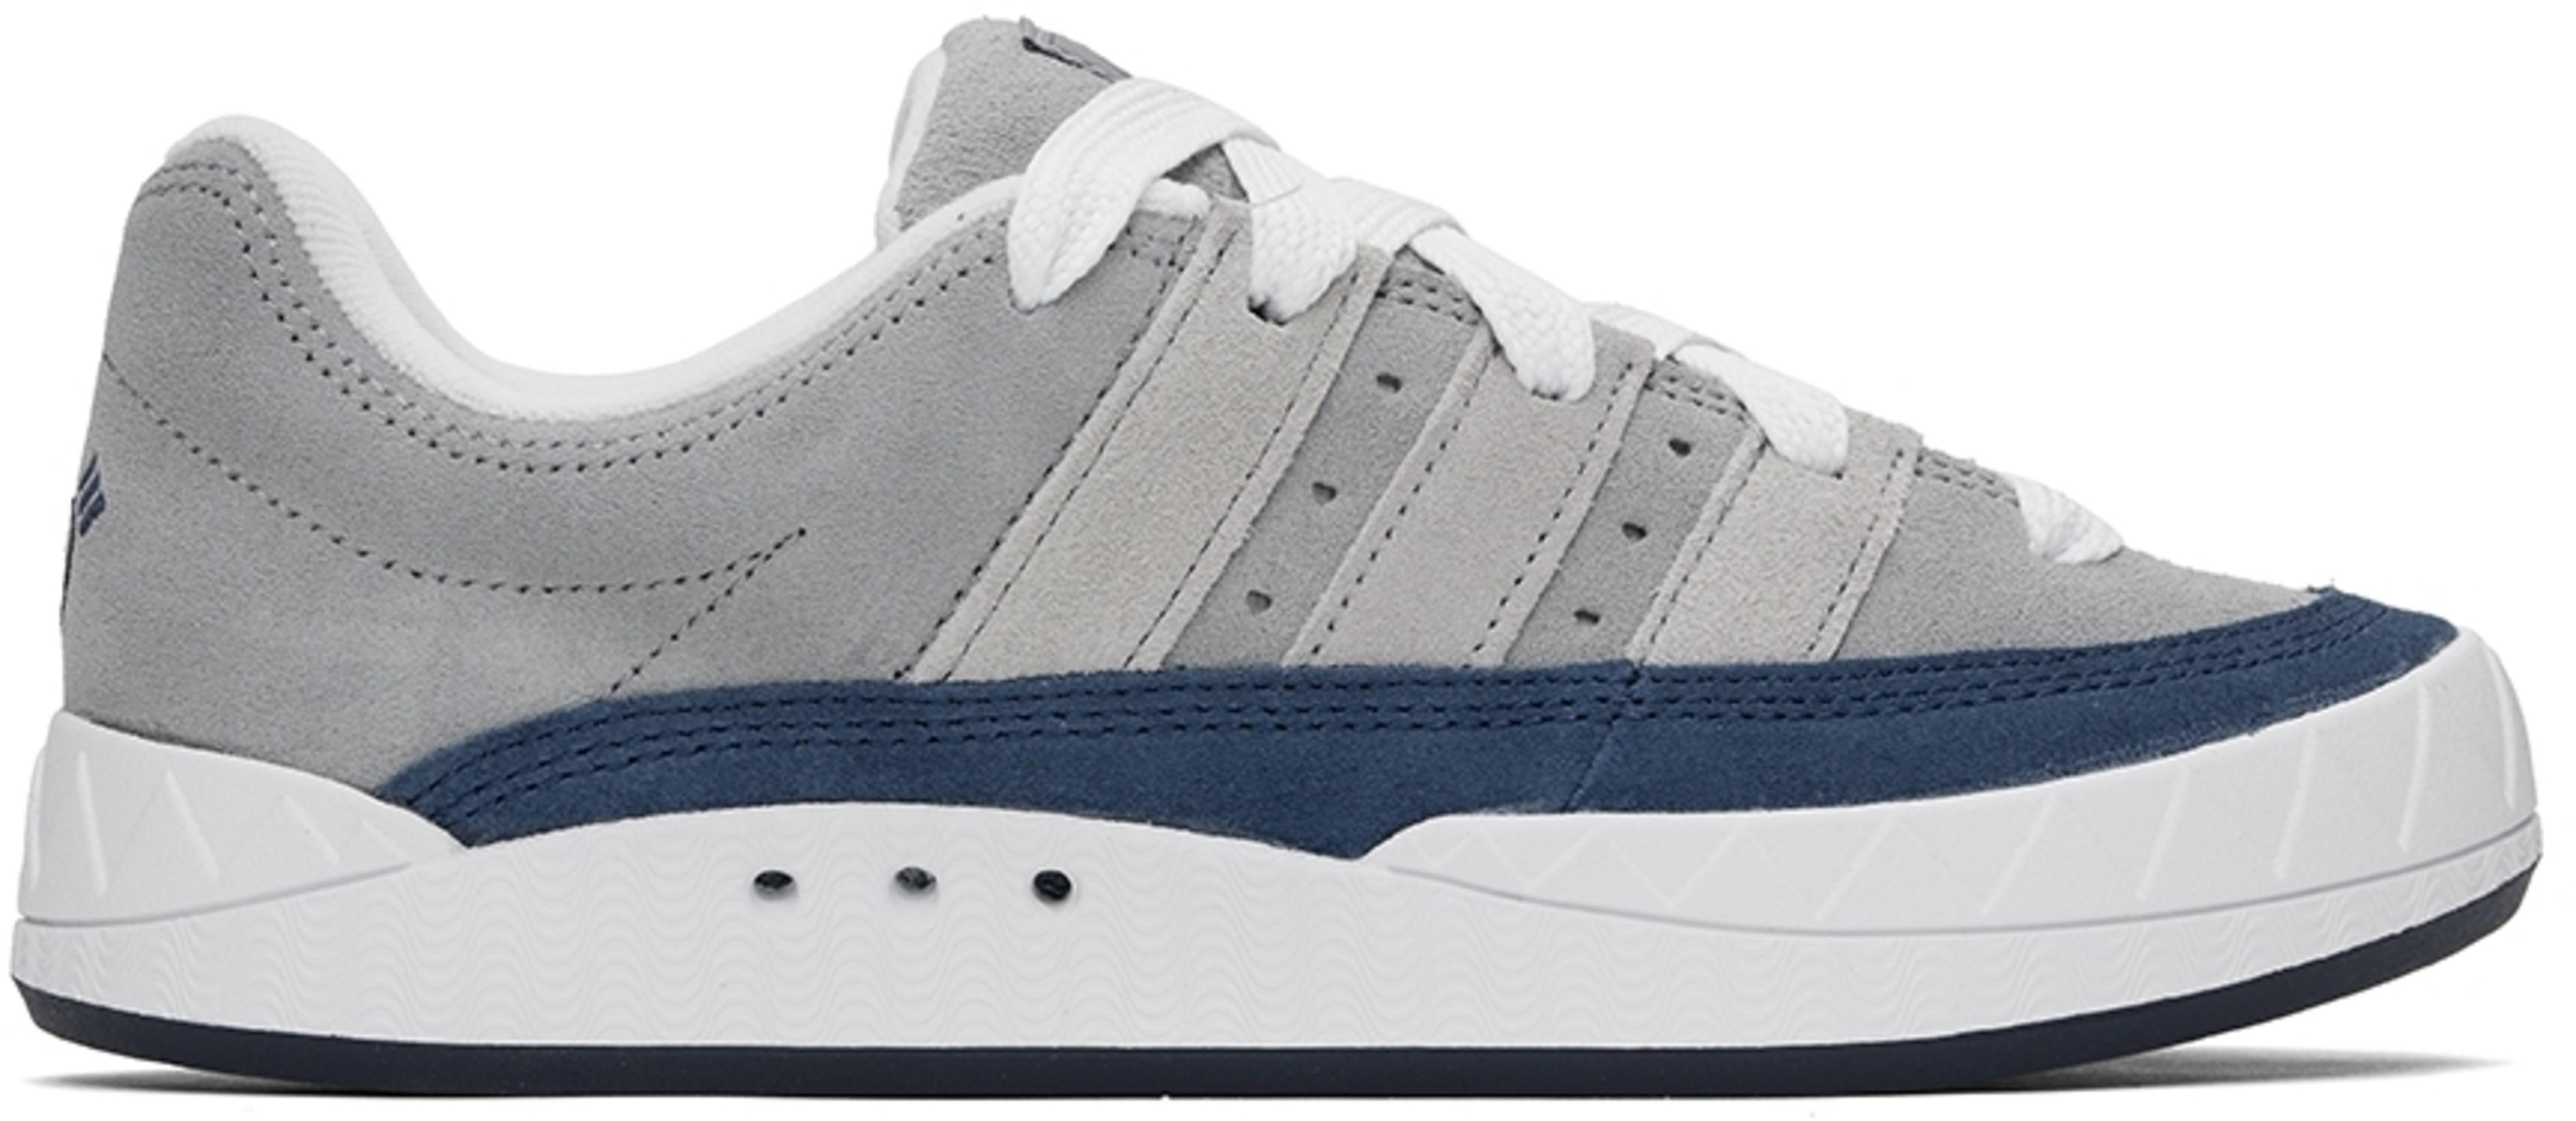 Gray & Navy Adimatic Sneakers by ADIDAS X HUMAN MADE